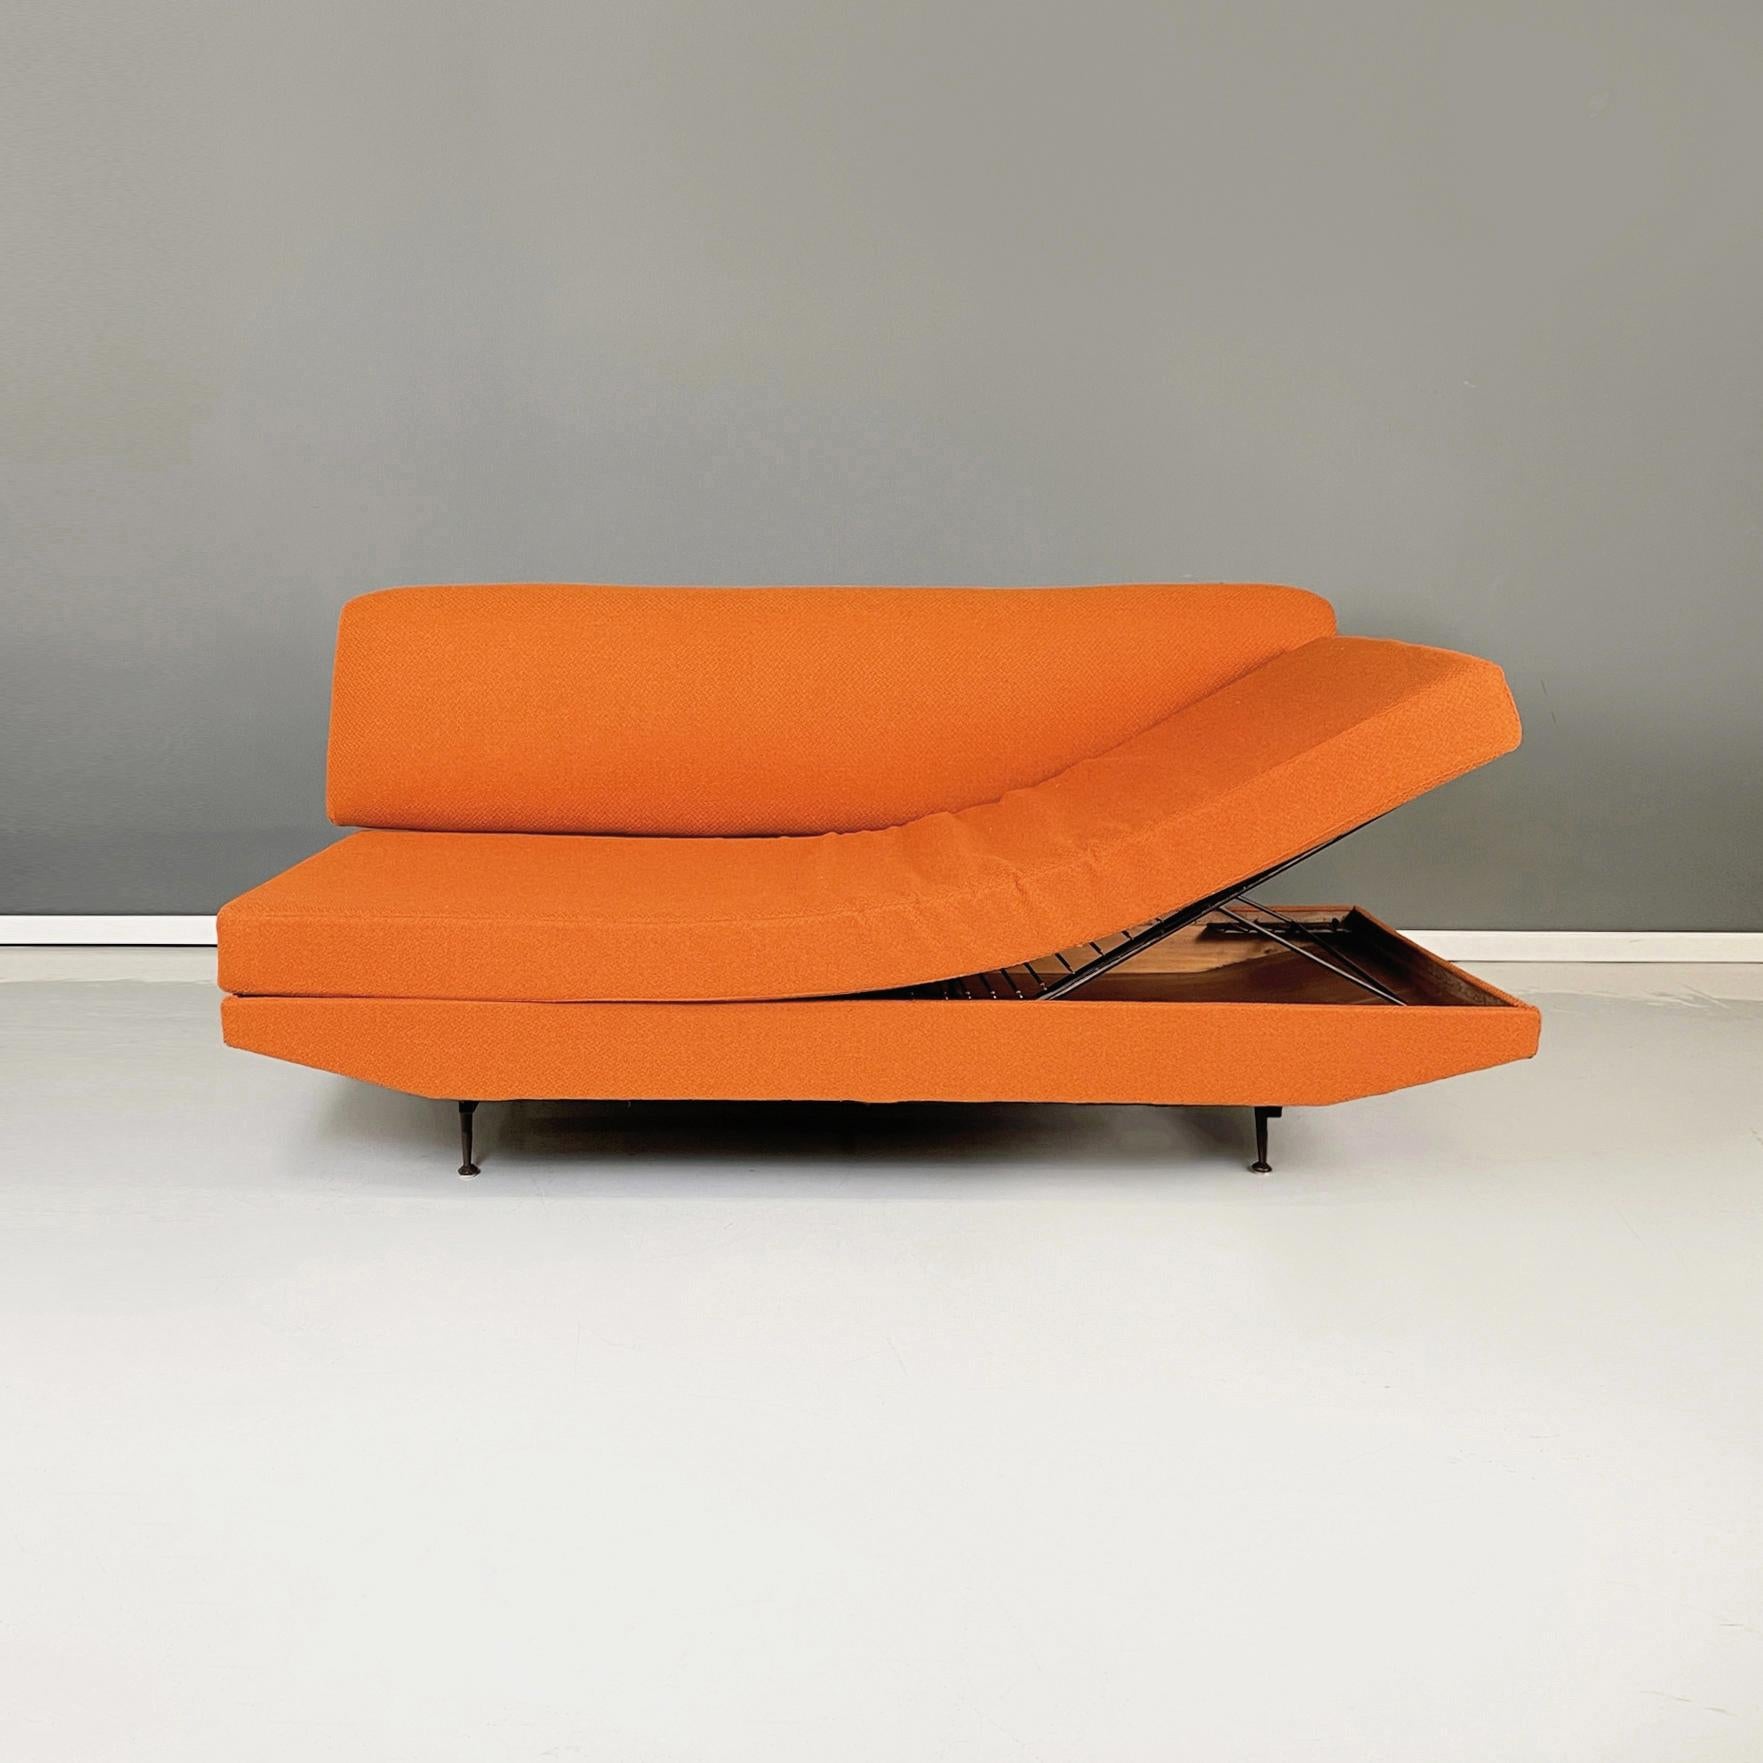 Italian Mid-Century Modern Sofa and Bed in orange Fabric and Black Metal, 1960s 1